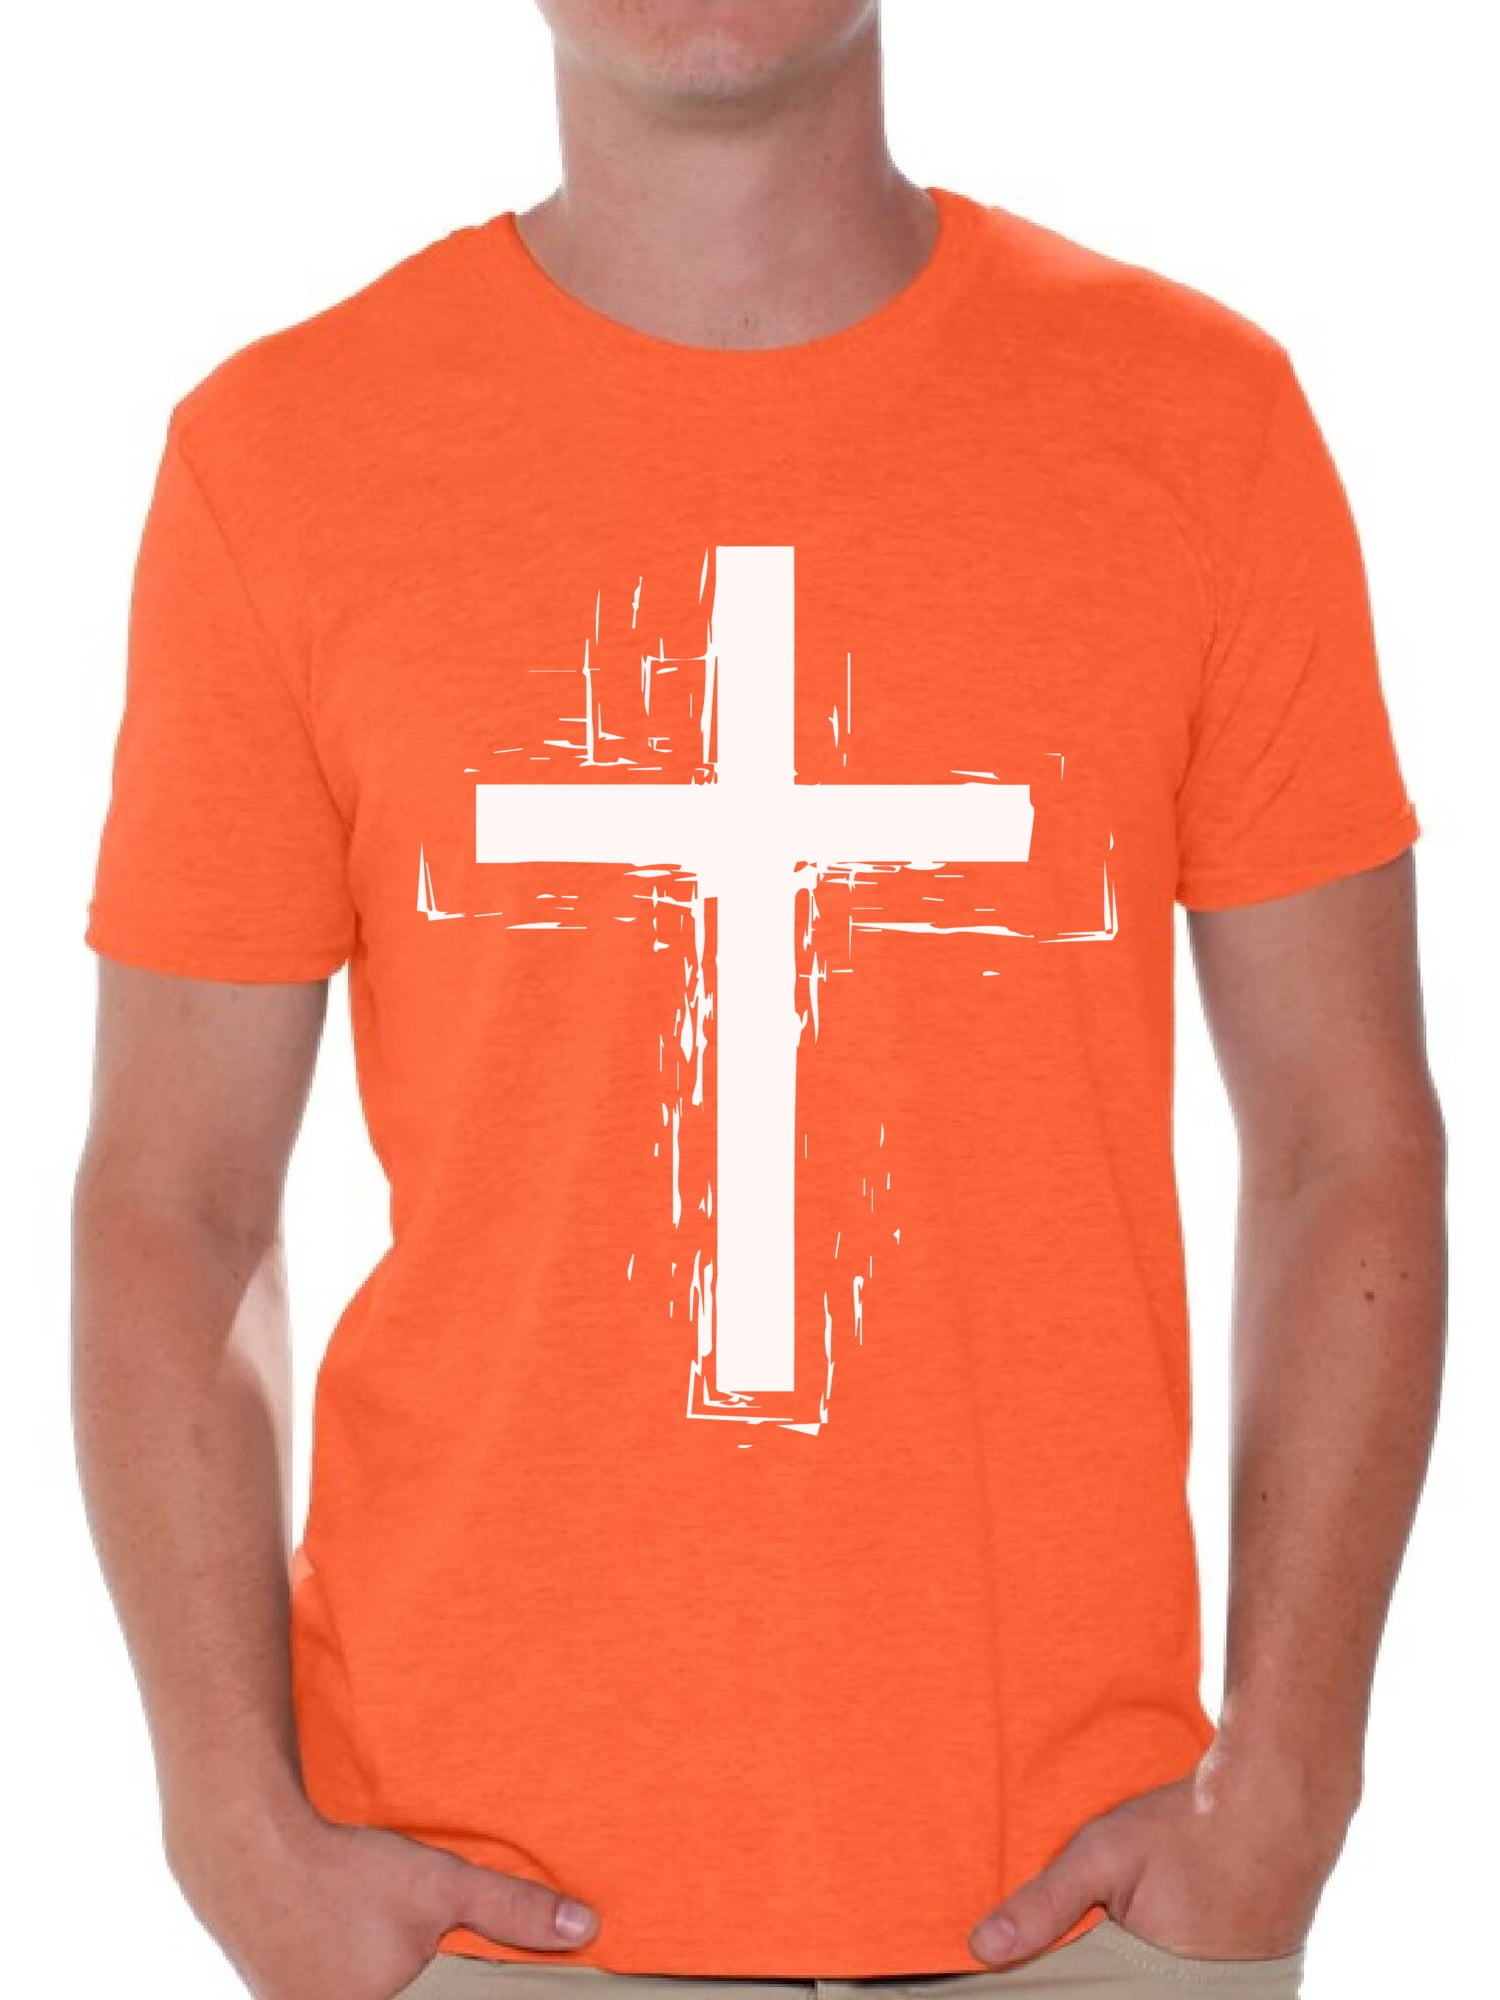 Buy Awkward Styles Cross T Shirt for Men Christian Mens Shirts Christian  Cross Clothes for Men Jesus Christ is the Lord Christian Cross Birthday  Gifts Jesus Shirts Jesus Clothing Cross Mens Shirt